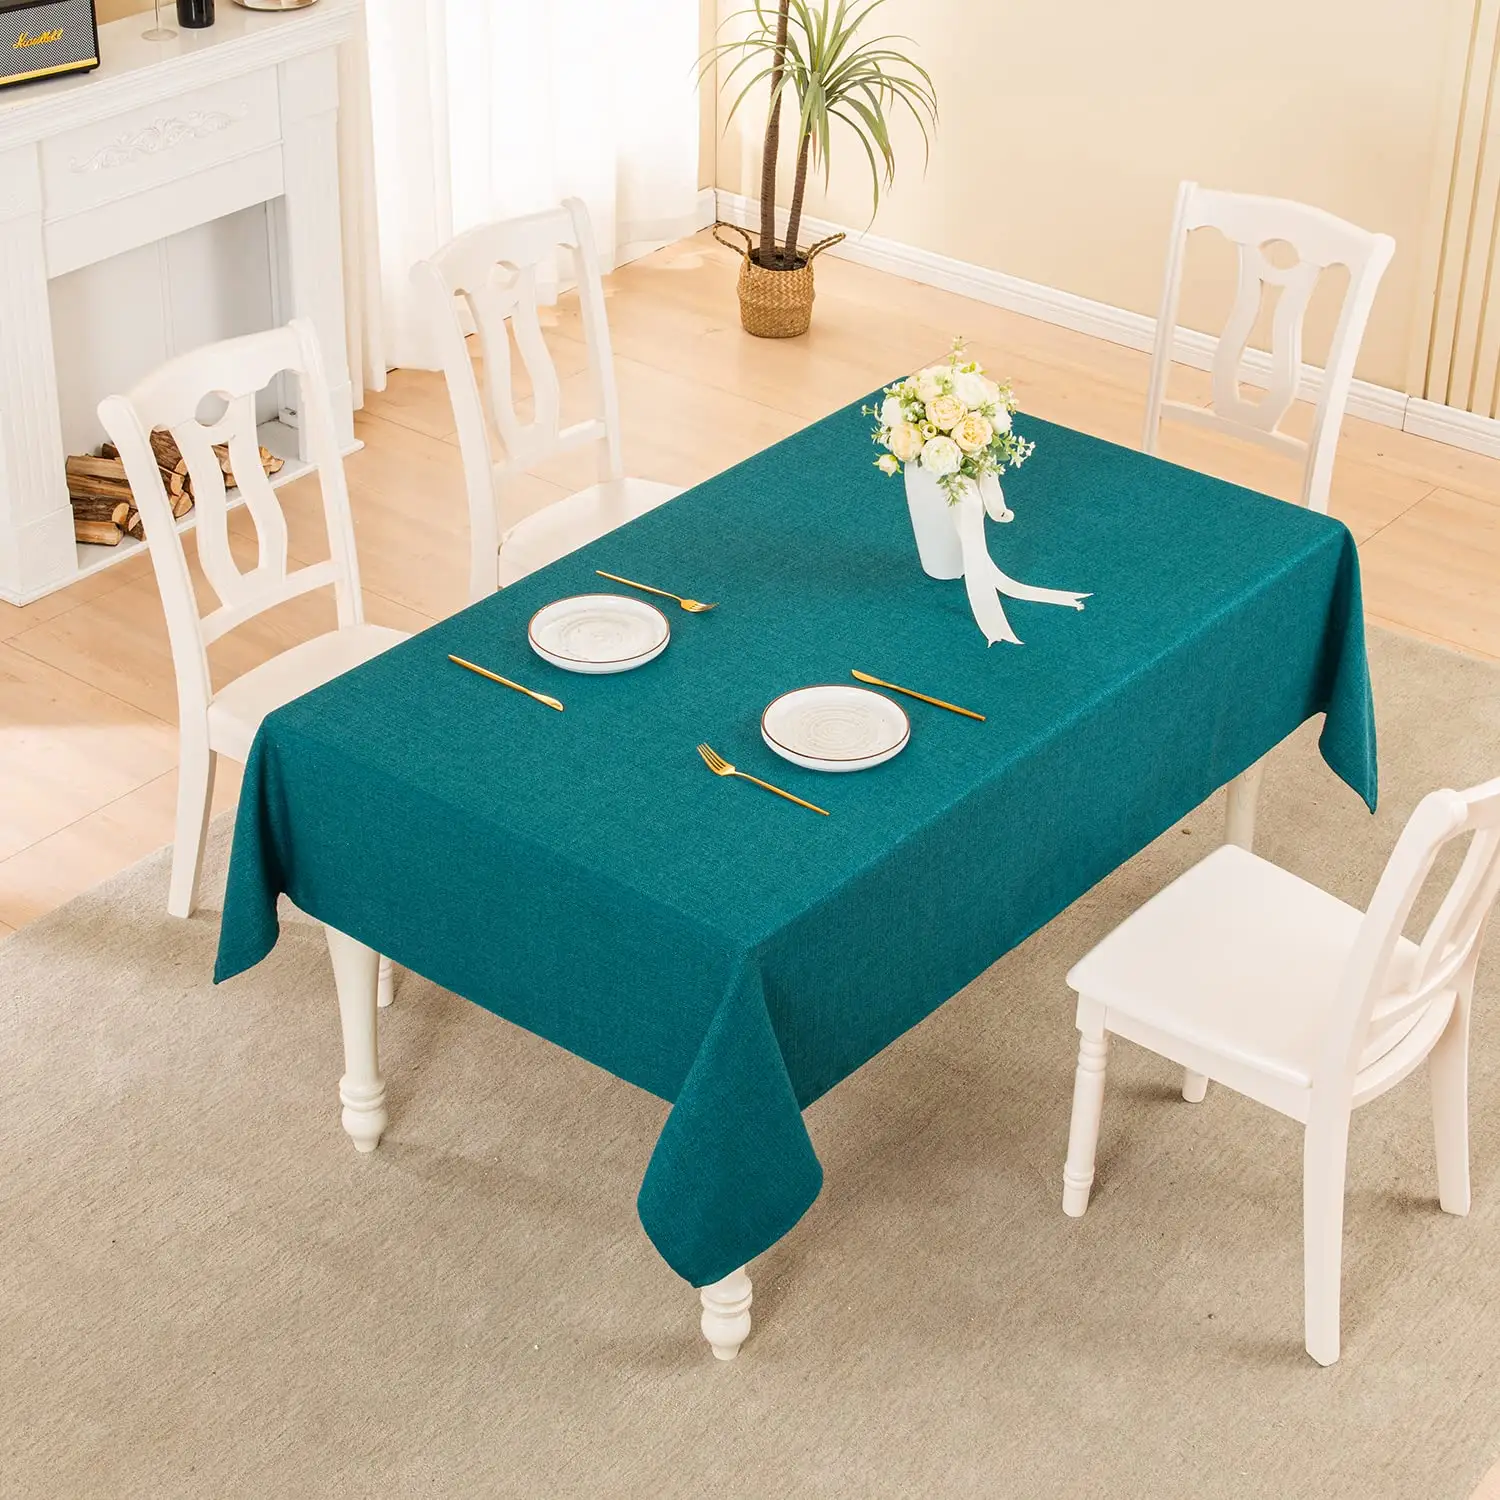 Water Proof Rectangular Table Cloth Linen Fabric Tablecloths for Wedding Home Decoration